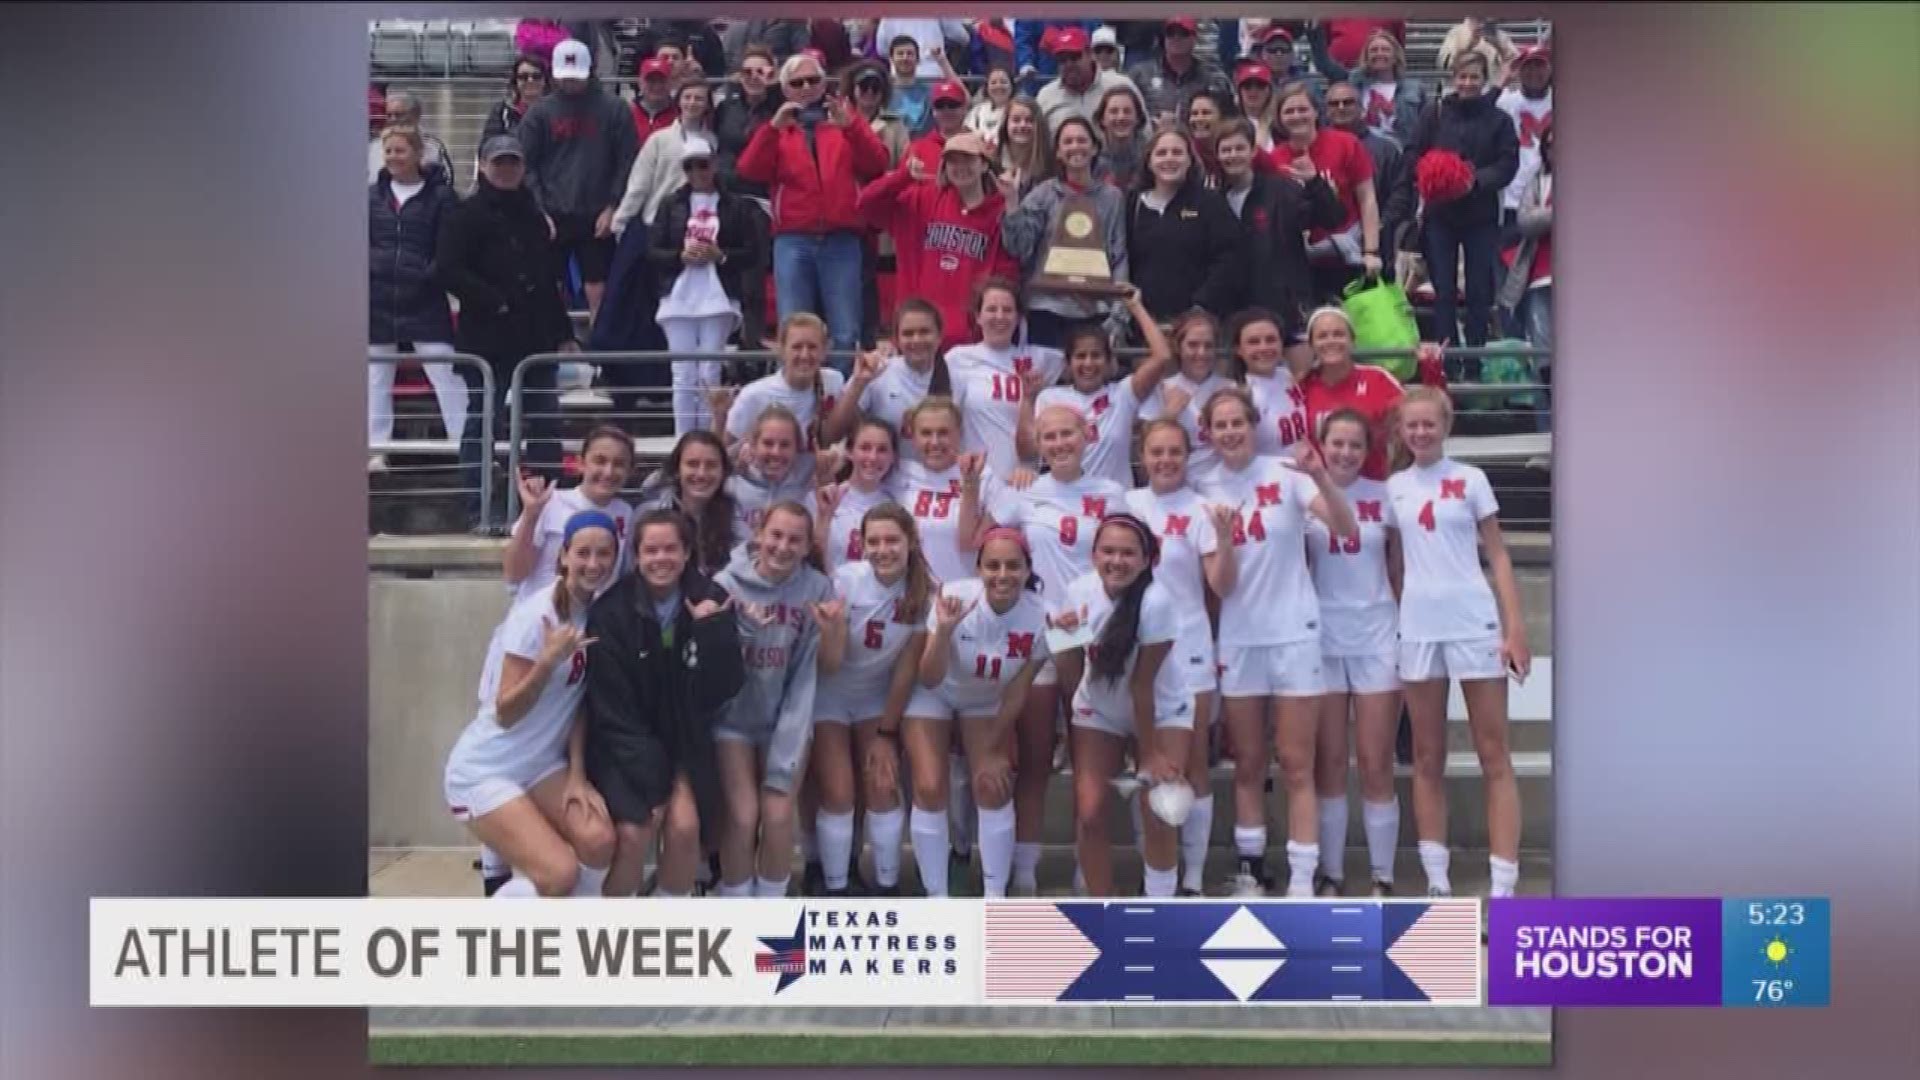 This week, the KHOU 11 Sports team decided to feature not just one athlete for our Athlete Of The Week segment but a whole team of athletes, the Memorial High School girls soccer team who just won a state championship.